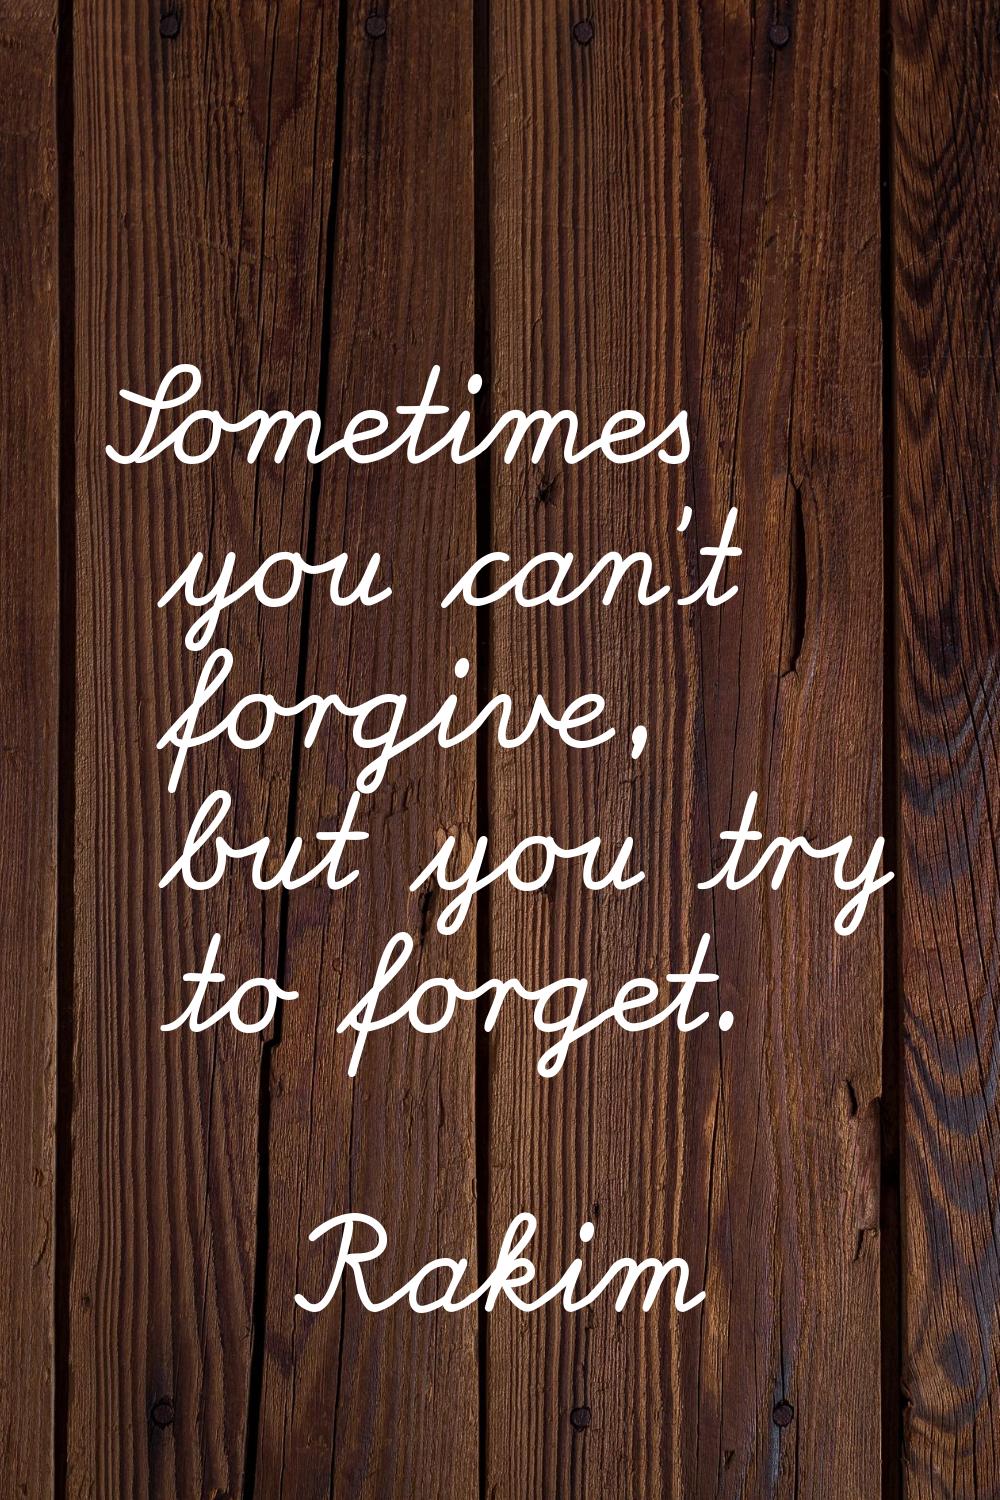 Sometimes you can't forgive, but you try to forget.